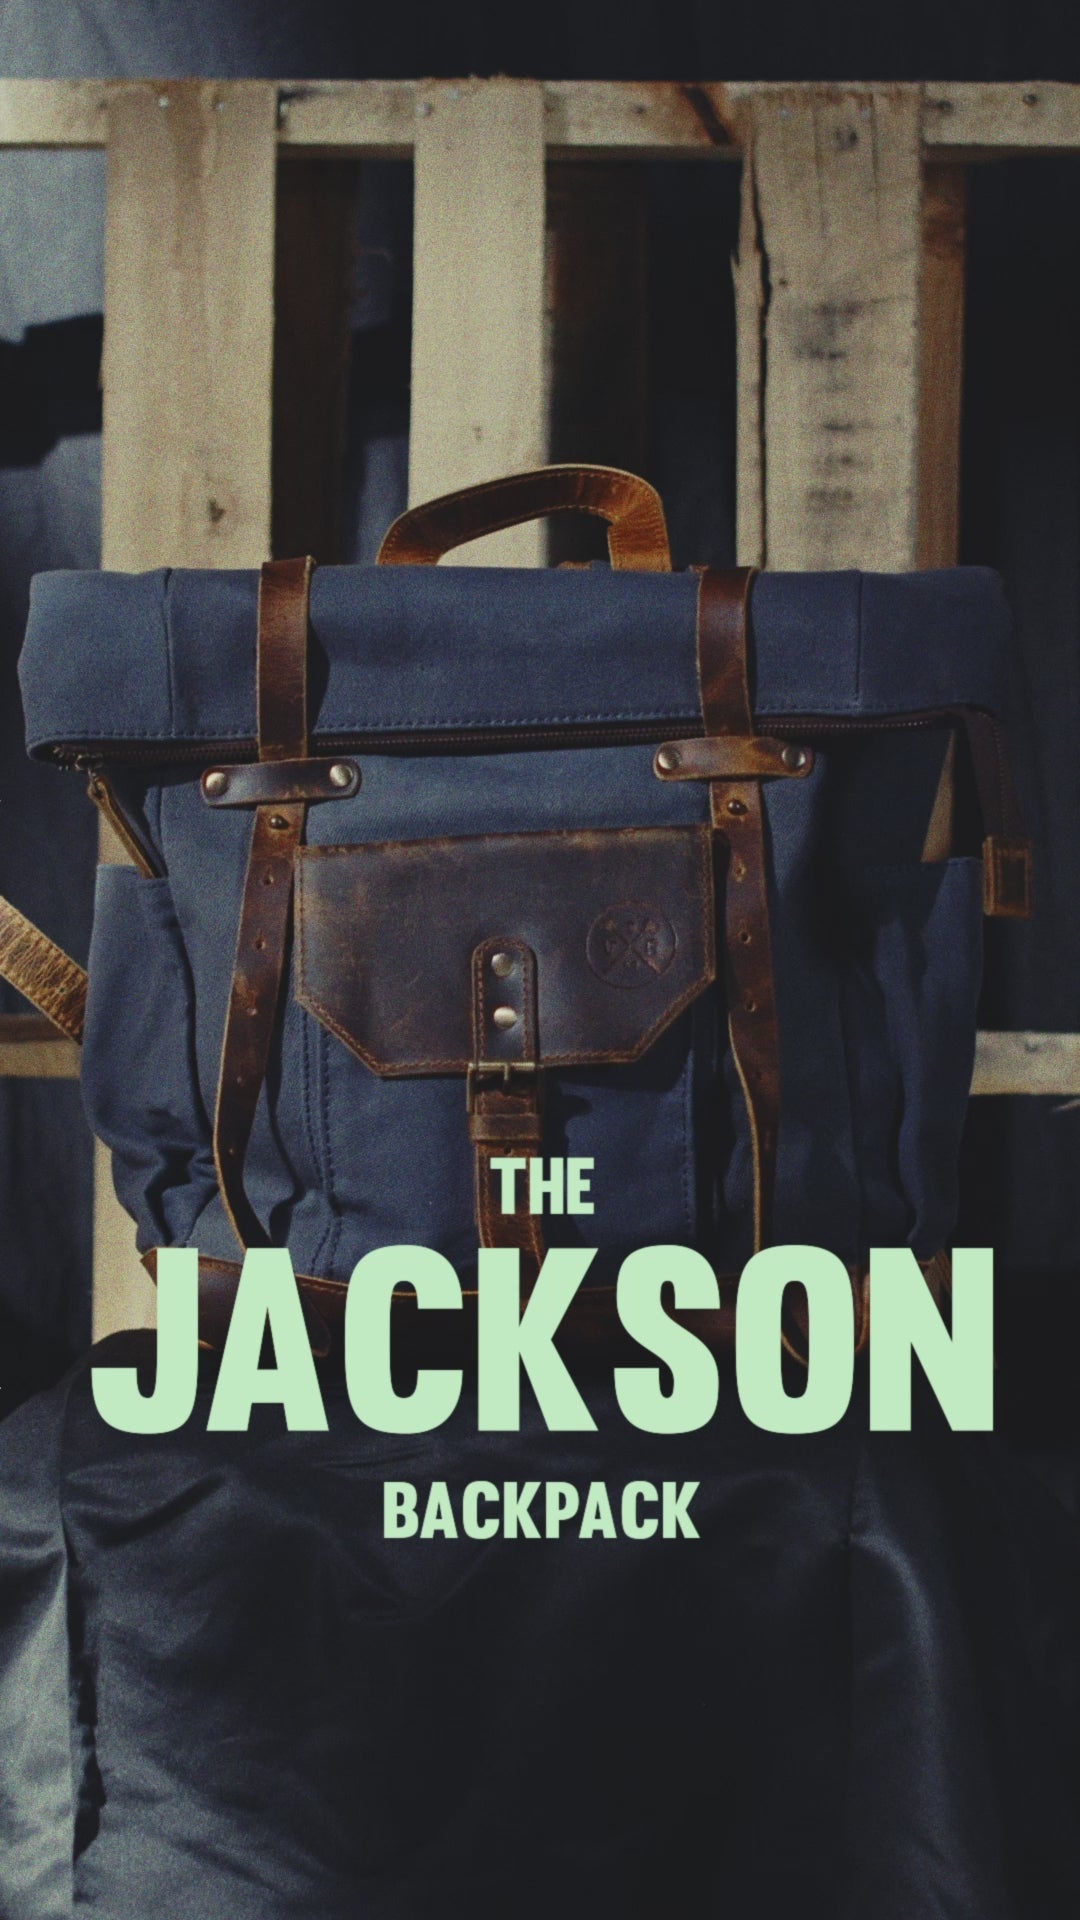 The “Jackson” Backpack